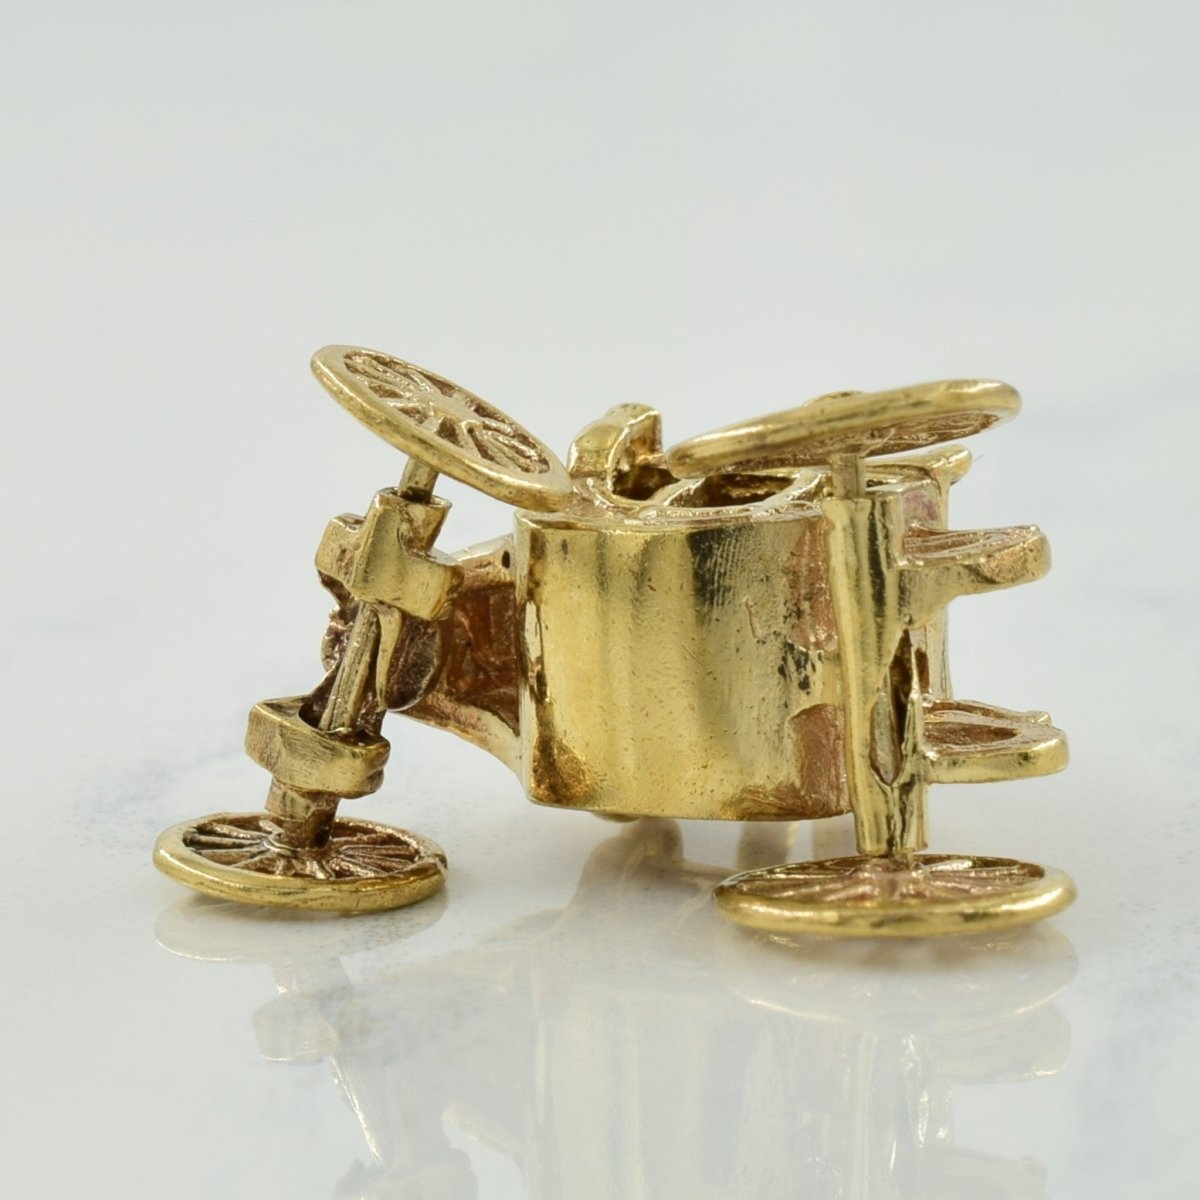 10k Yellow Gold Carriage Charm | - 100 Ways